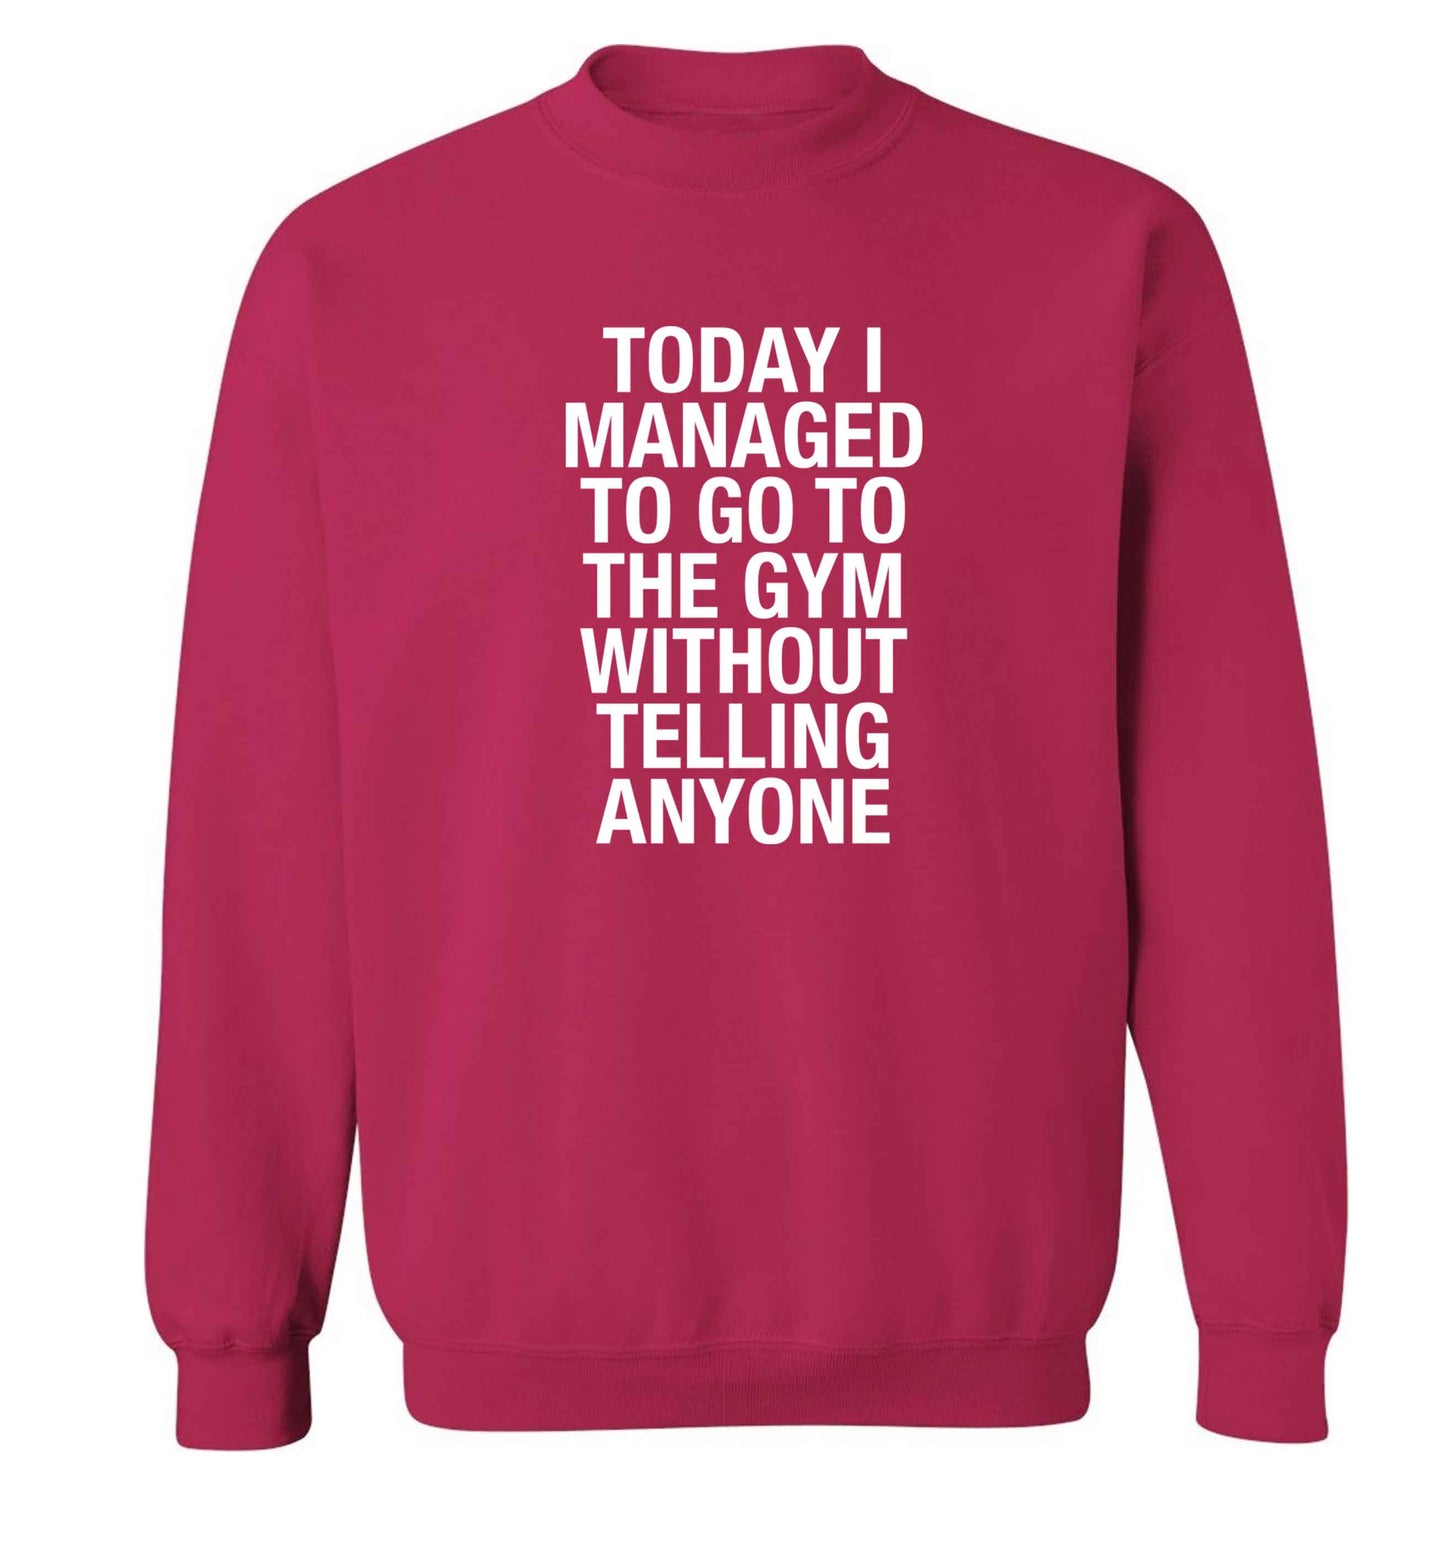 Today I managed to go to the gym without telling anyone adult's unisex pink sweater 2XL